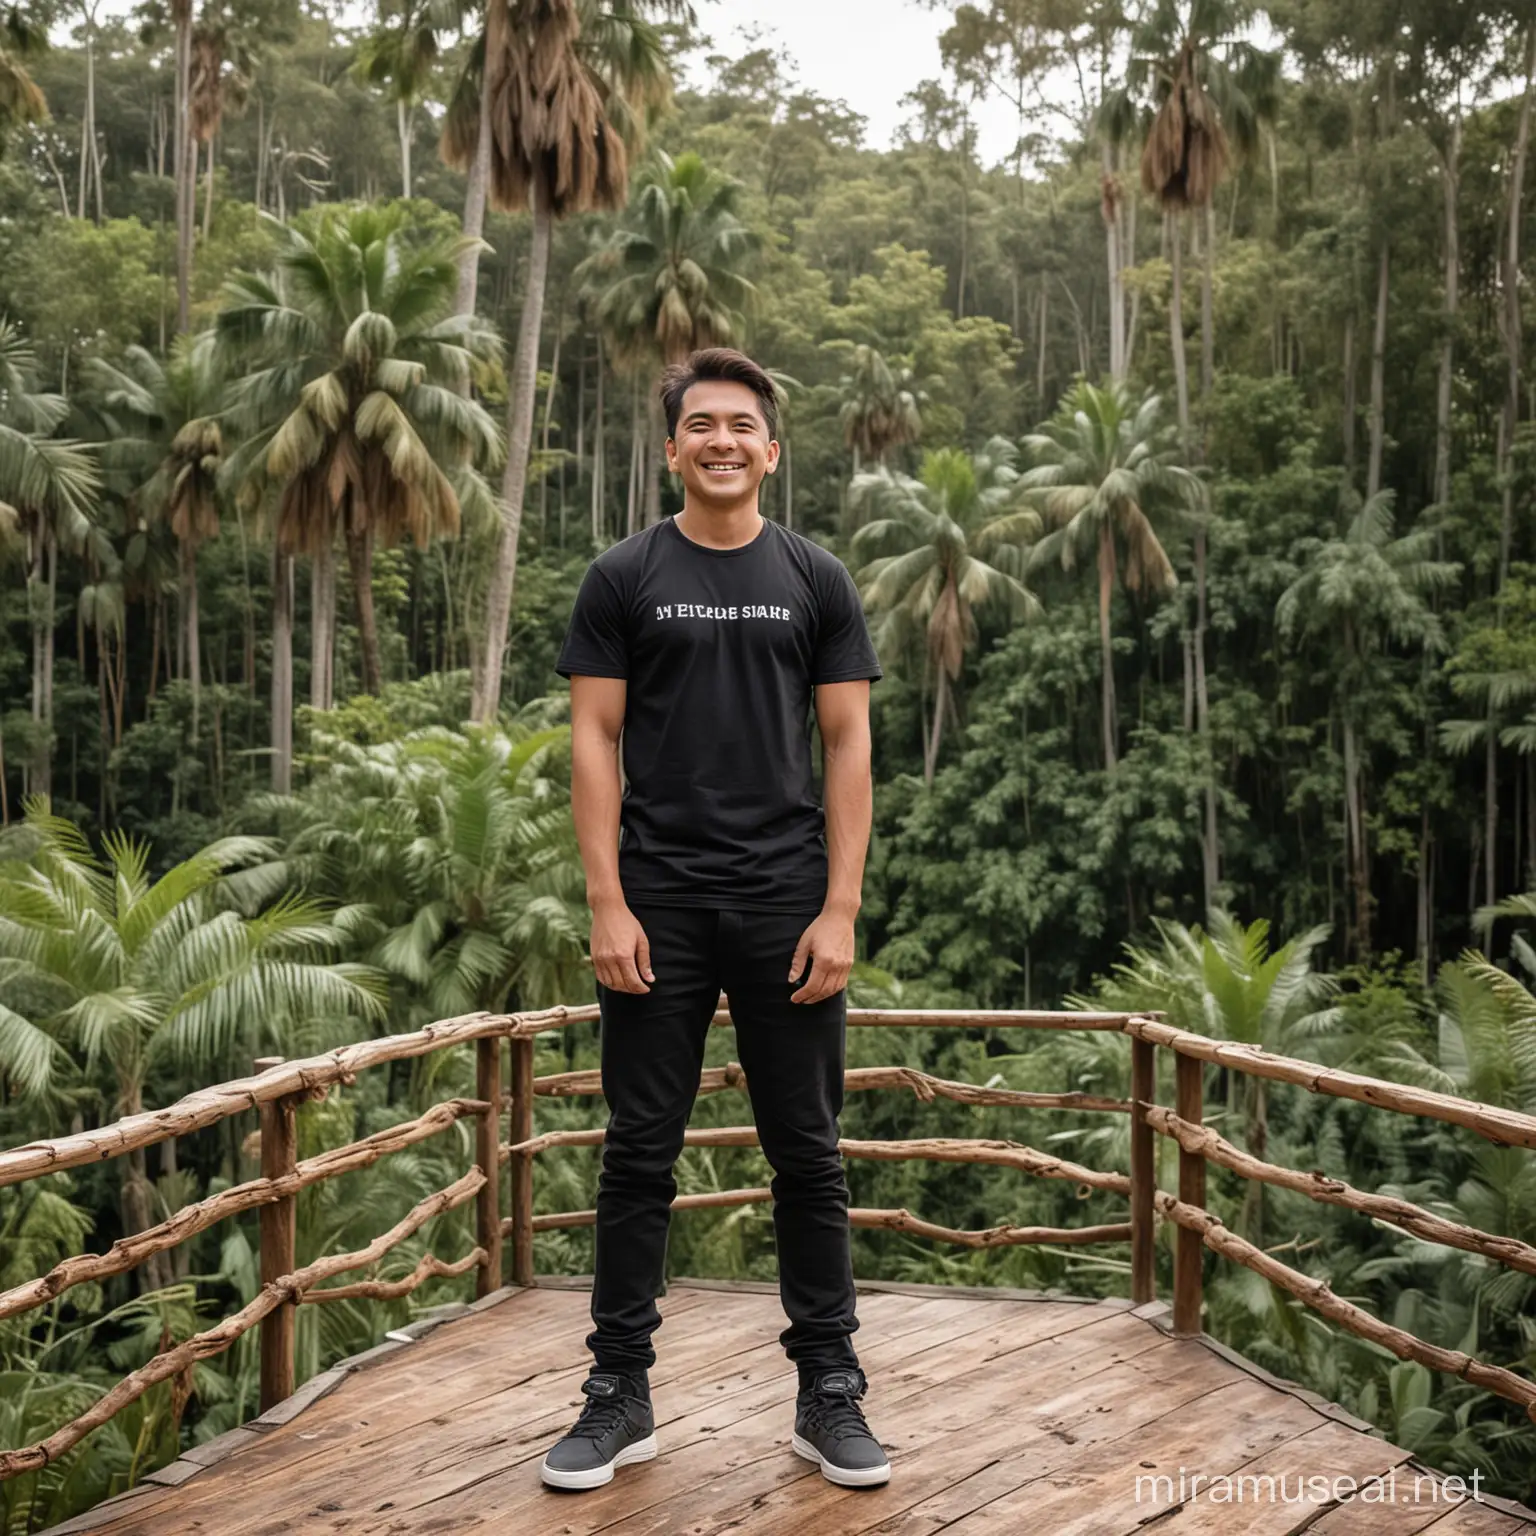 a man standing on top of a wooden deck, happy kid, man in black, wearing black tshirt, jungle as the background, richard sigamani, full shot ( fs ), spaceship far on the background, daniel, in front of white back drop, pine trees in the background, eng kilian, lower quality, the jungle at the background, genuine smile